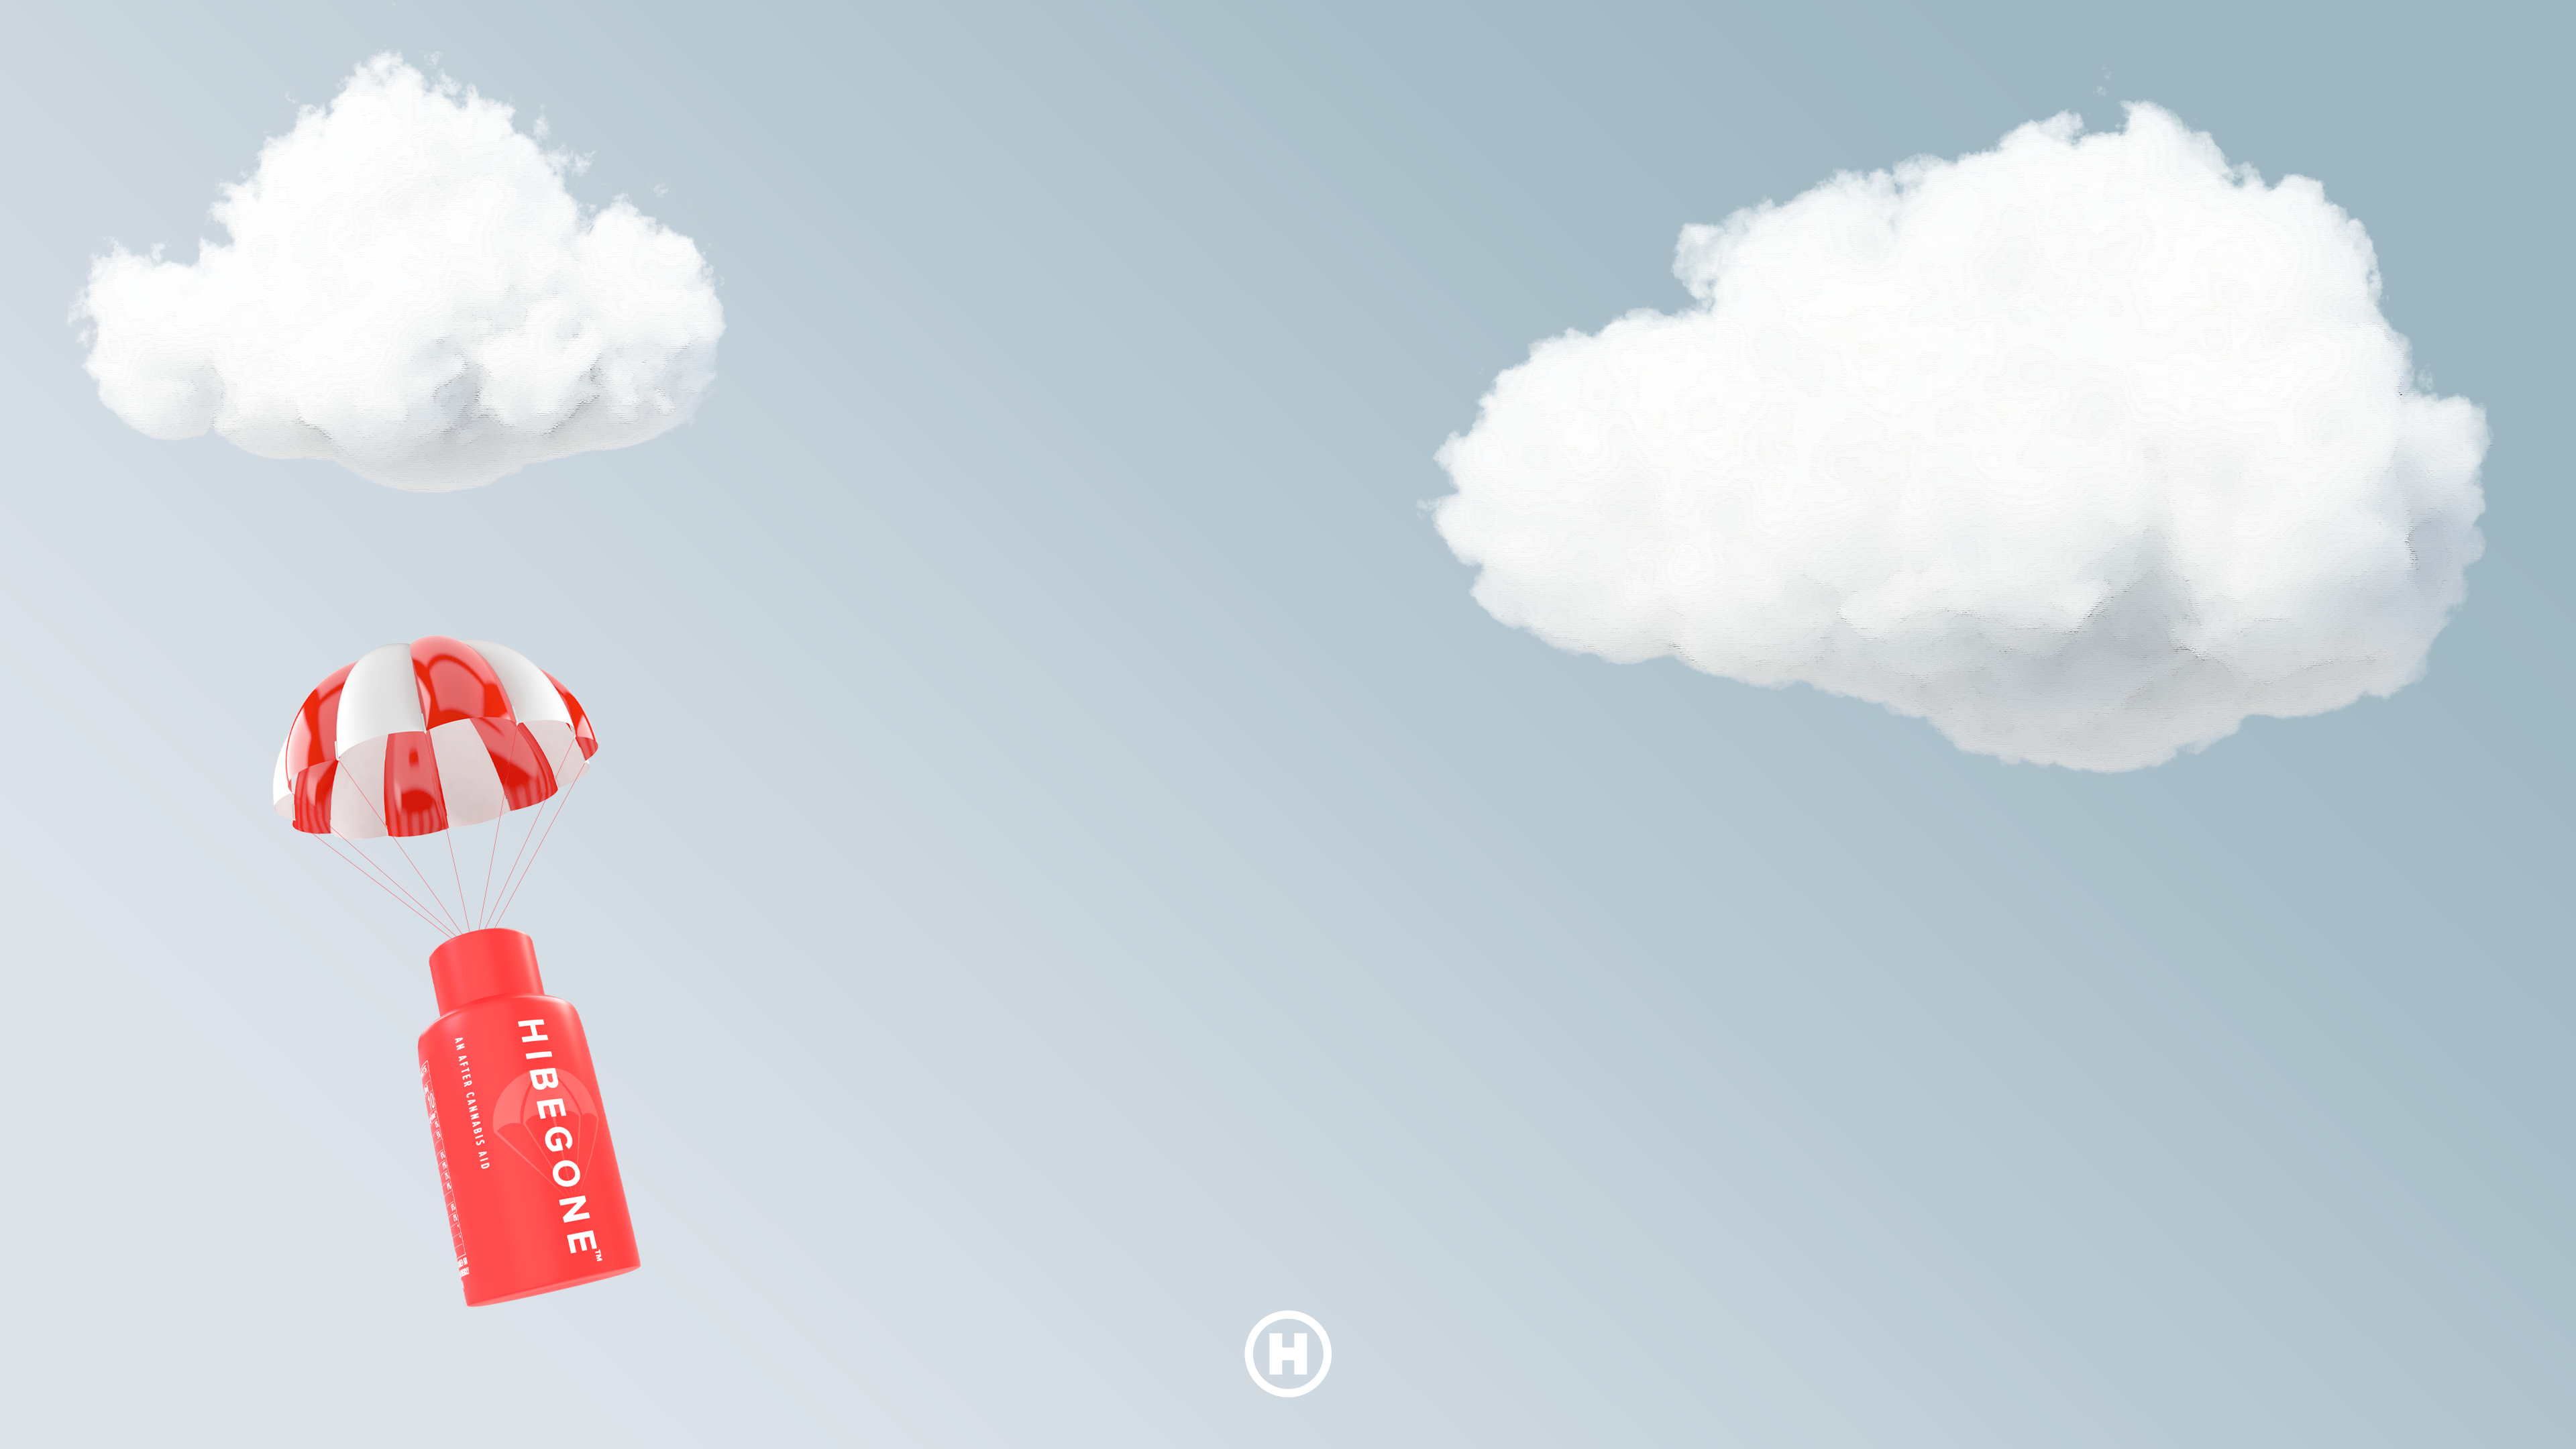 Website banner with the main background of a sky with clouds. A HIBEGONE branded bottle is floating down attached to a parachute.